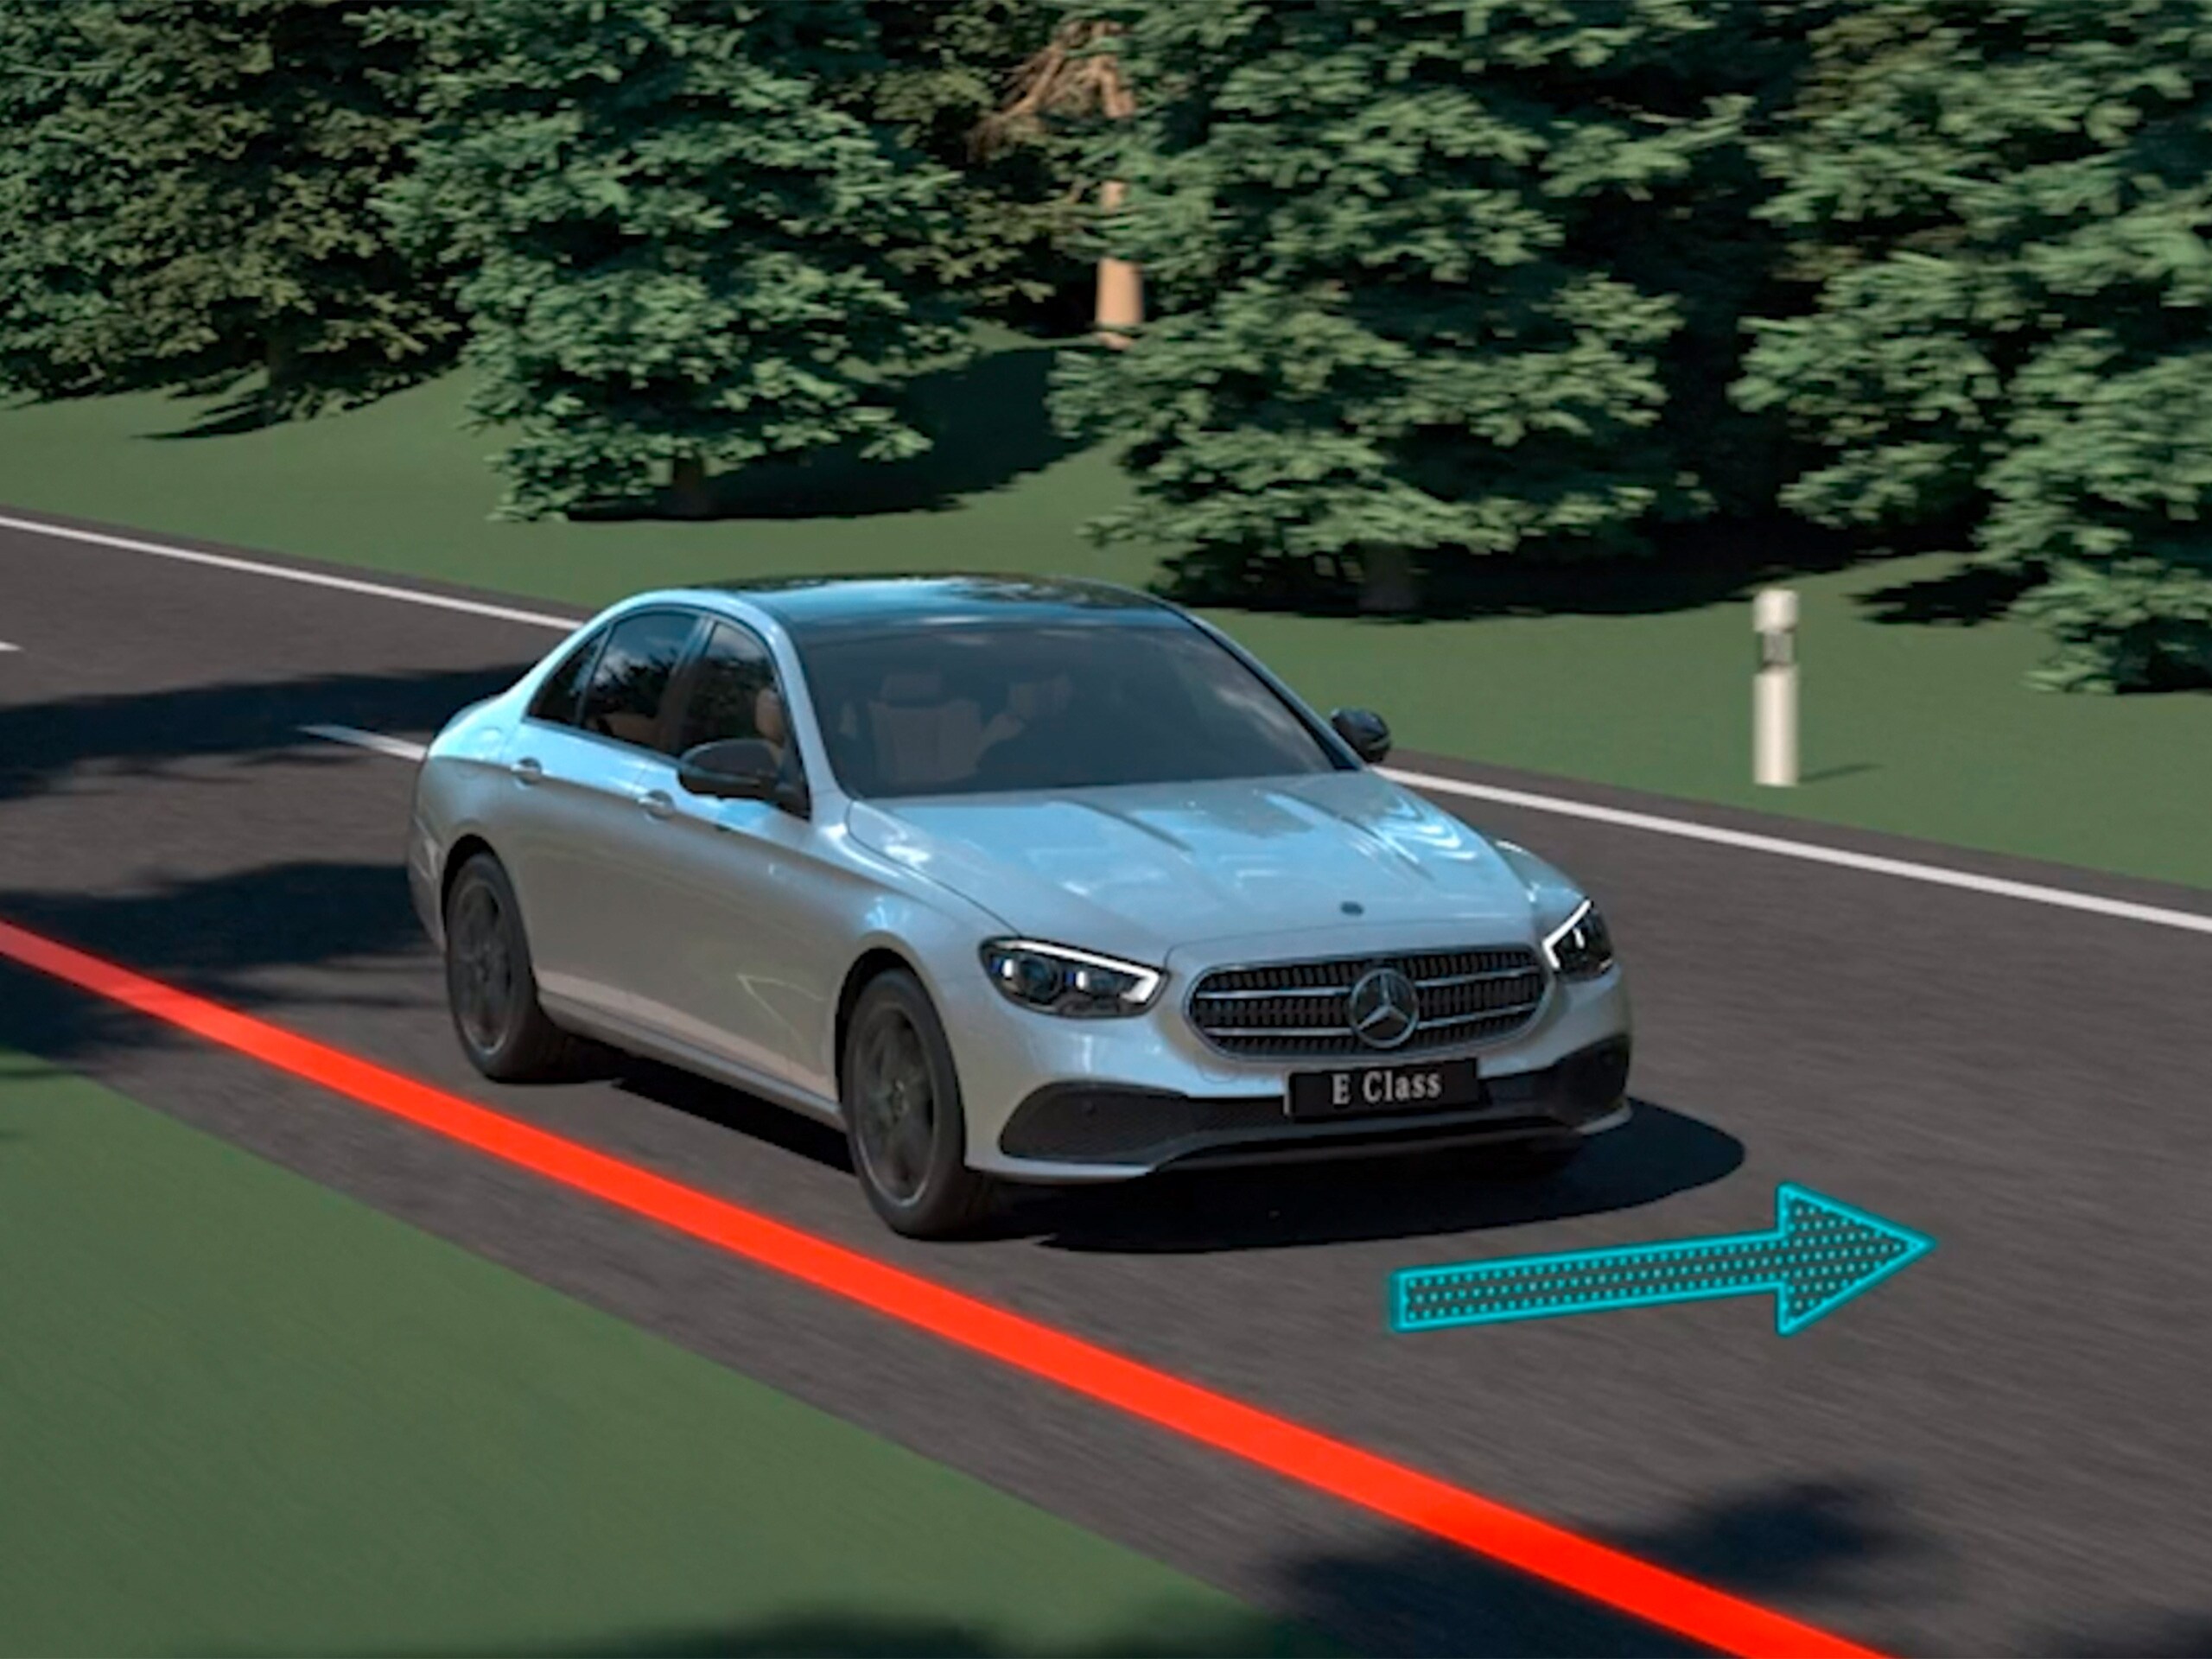 The video shows the function of Active Steering Assist in the Mercedes-Benz CLS Coupé.